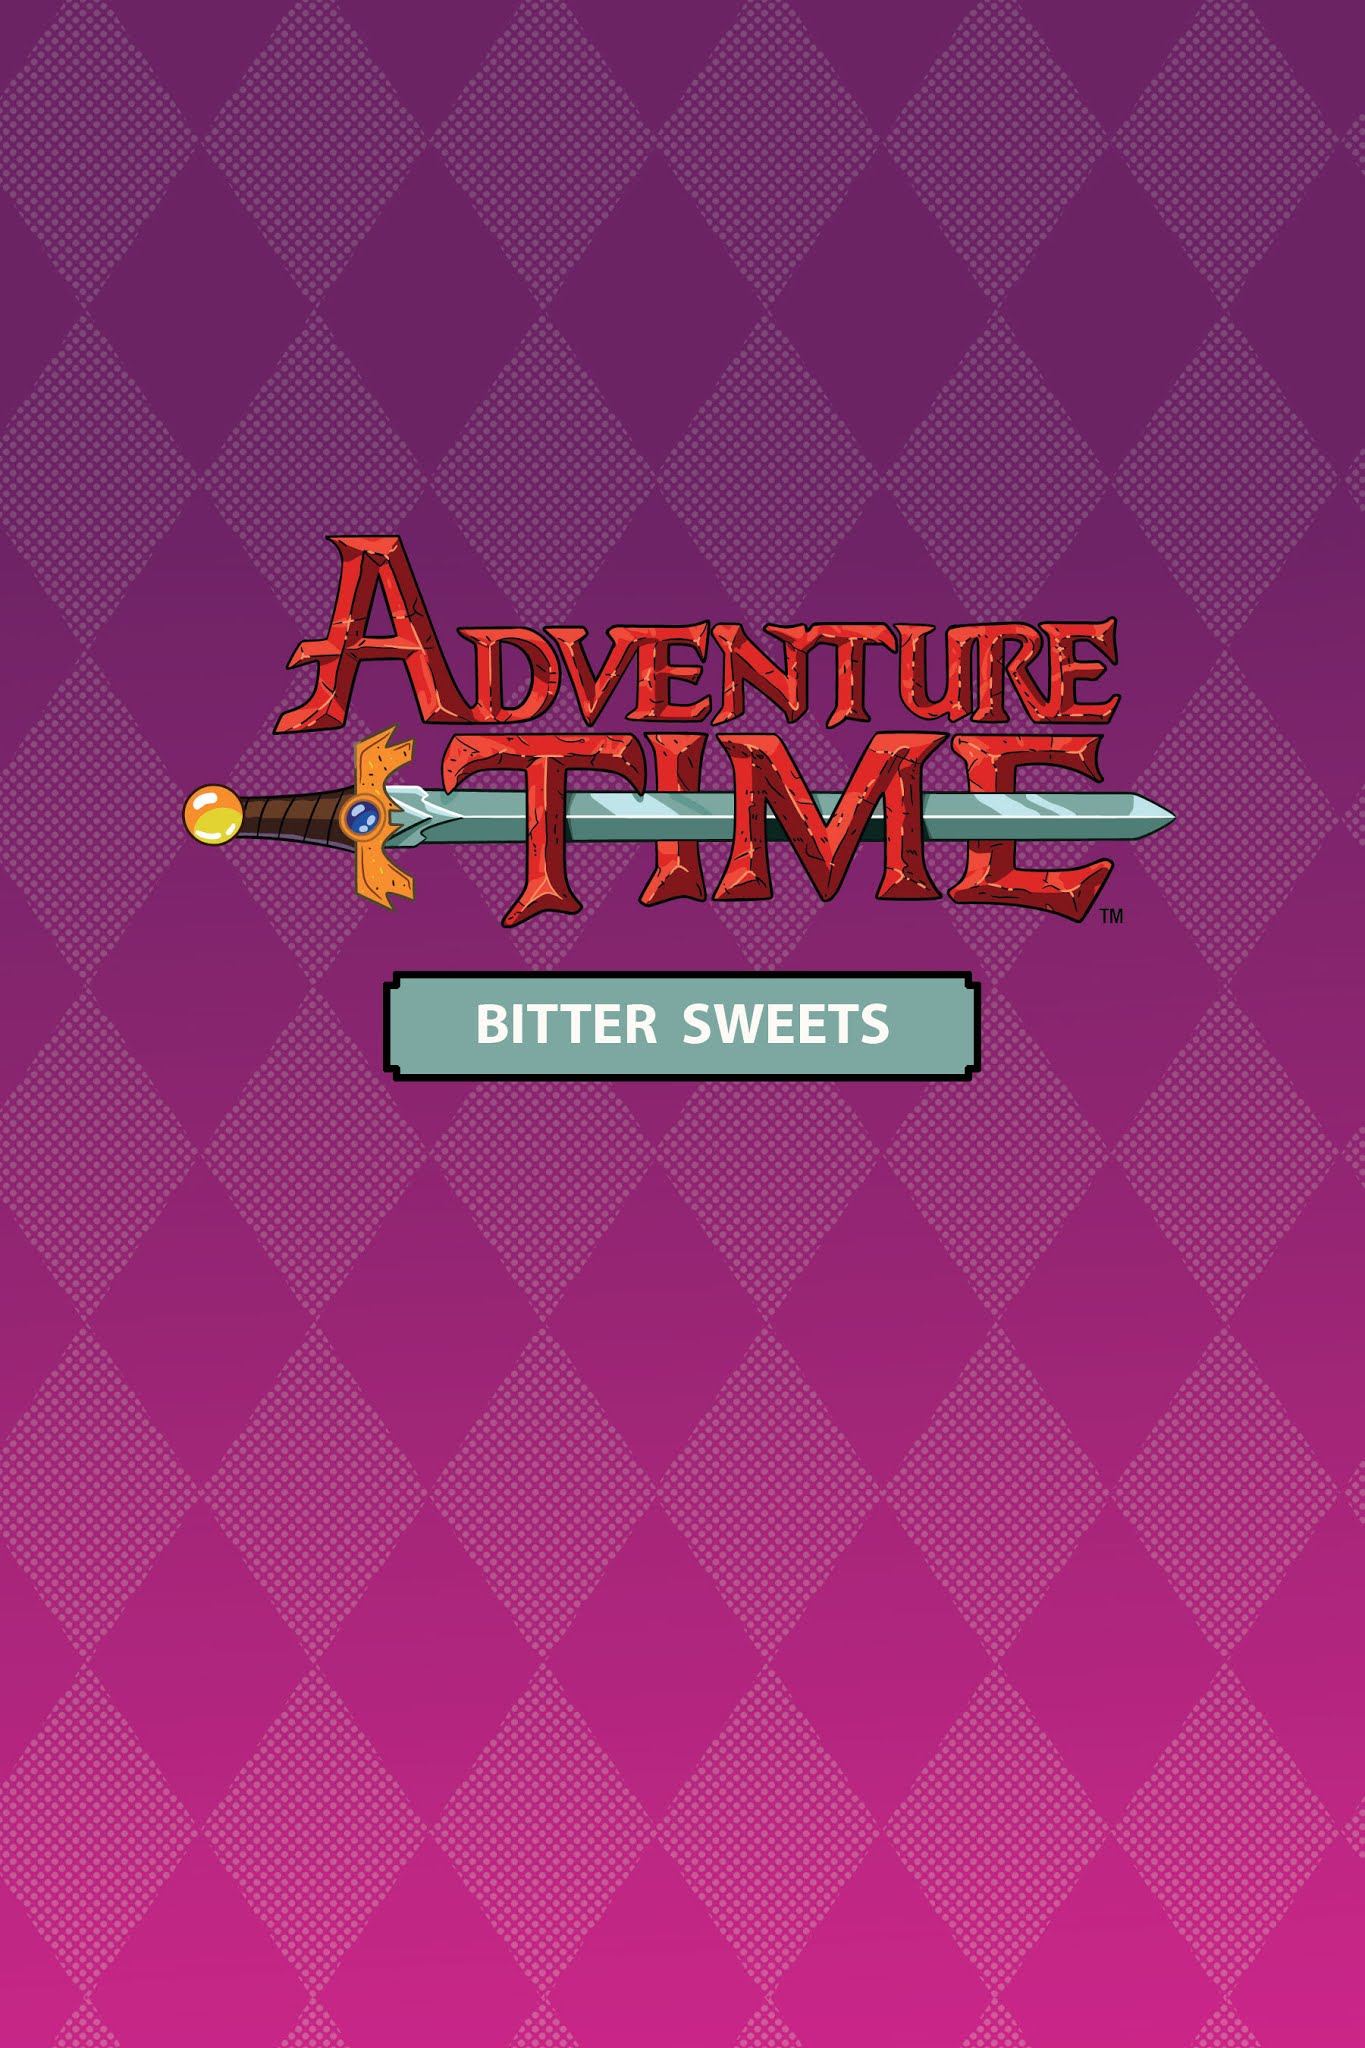 Read online Adventure Time: Bitter Sweets comic -  Issue # TPB - 3